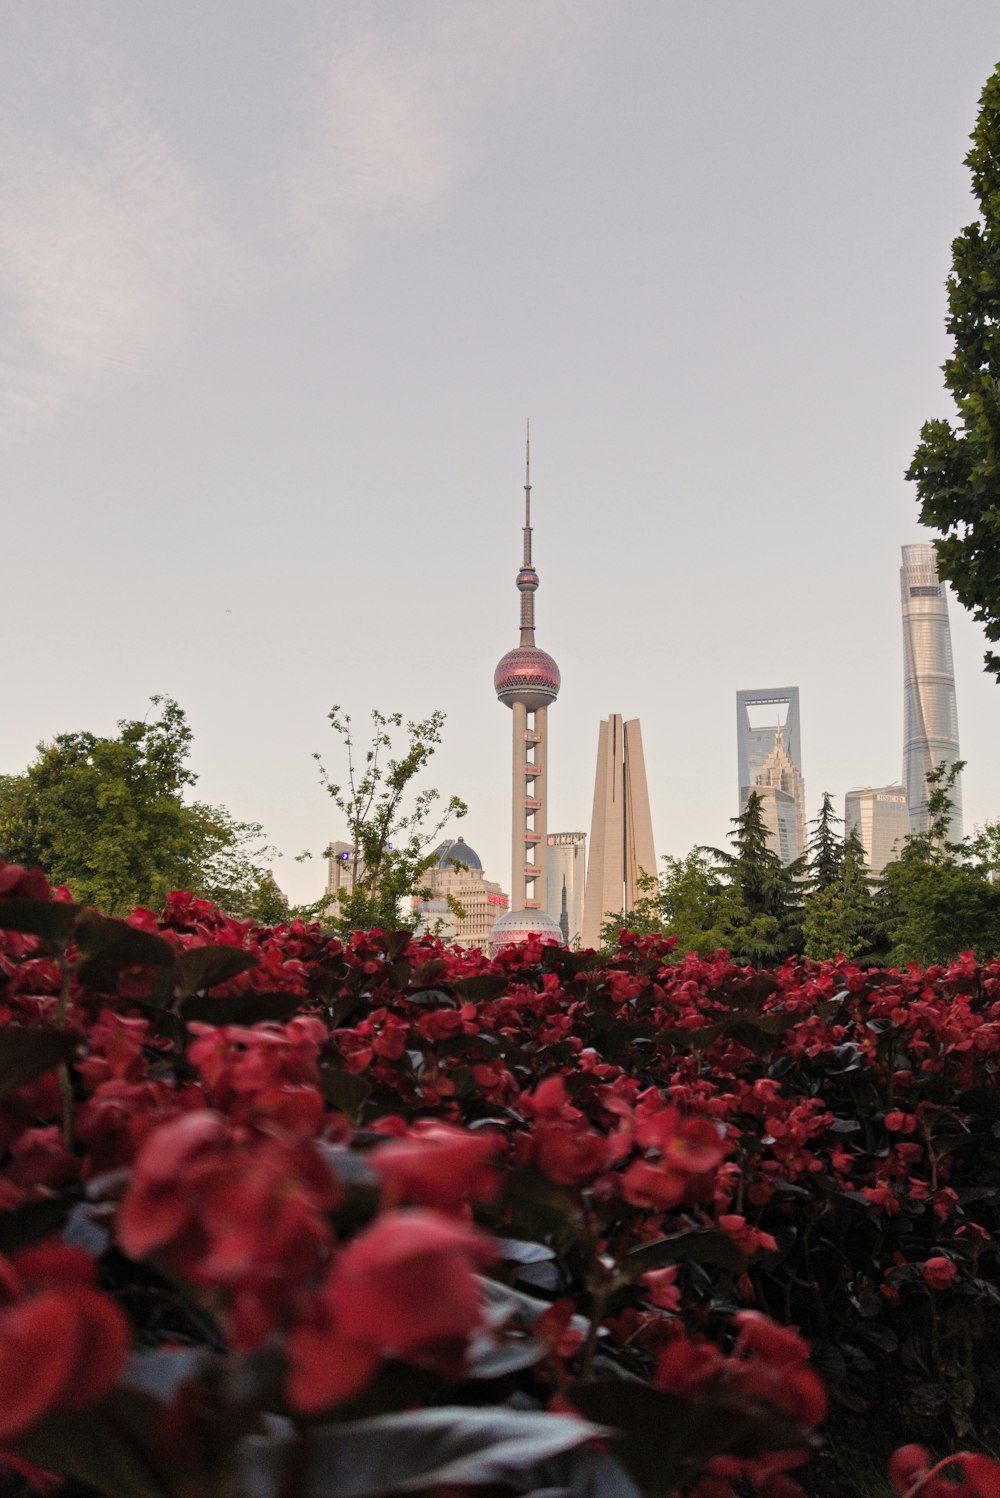 a view of a city from a flower garden